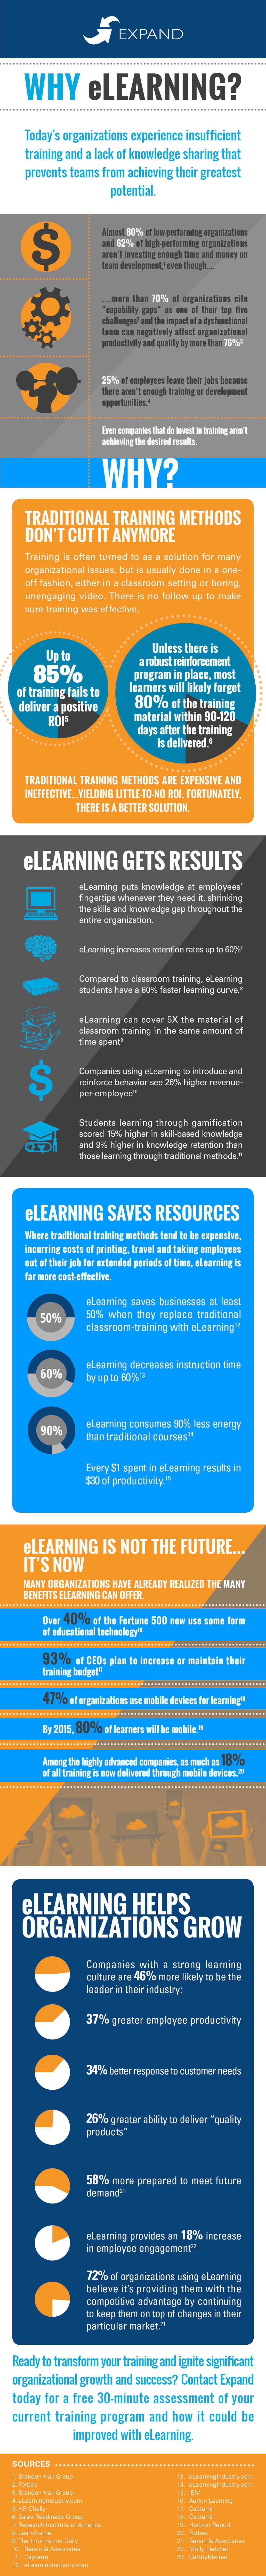 5 Reasons to Embrace eLearning Infographic